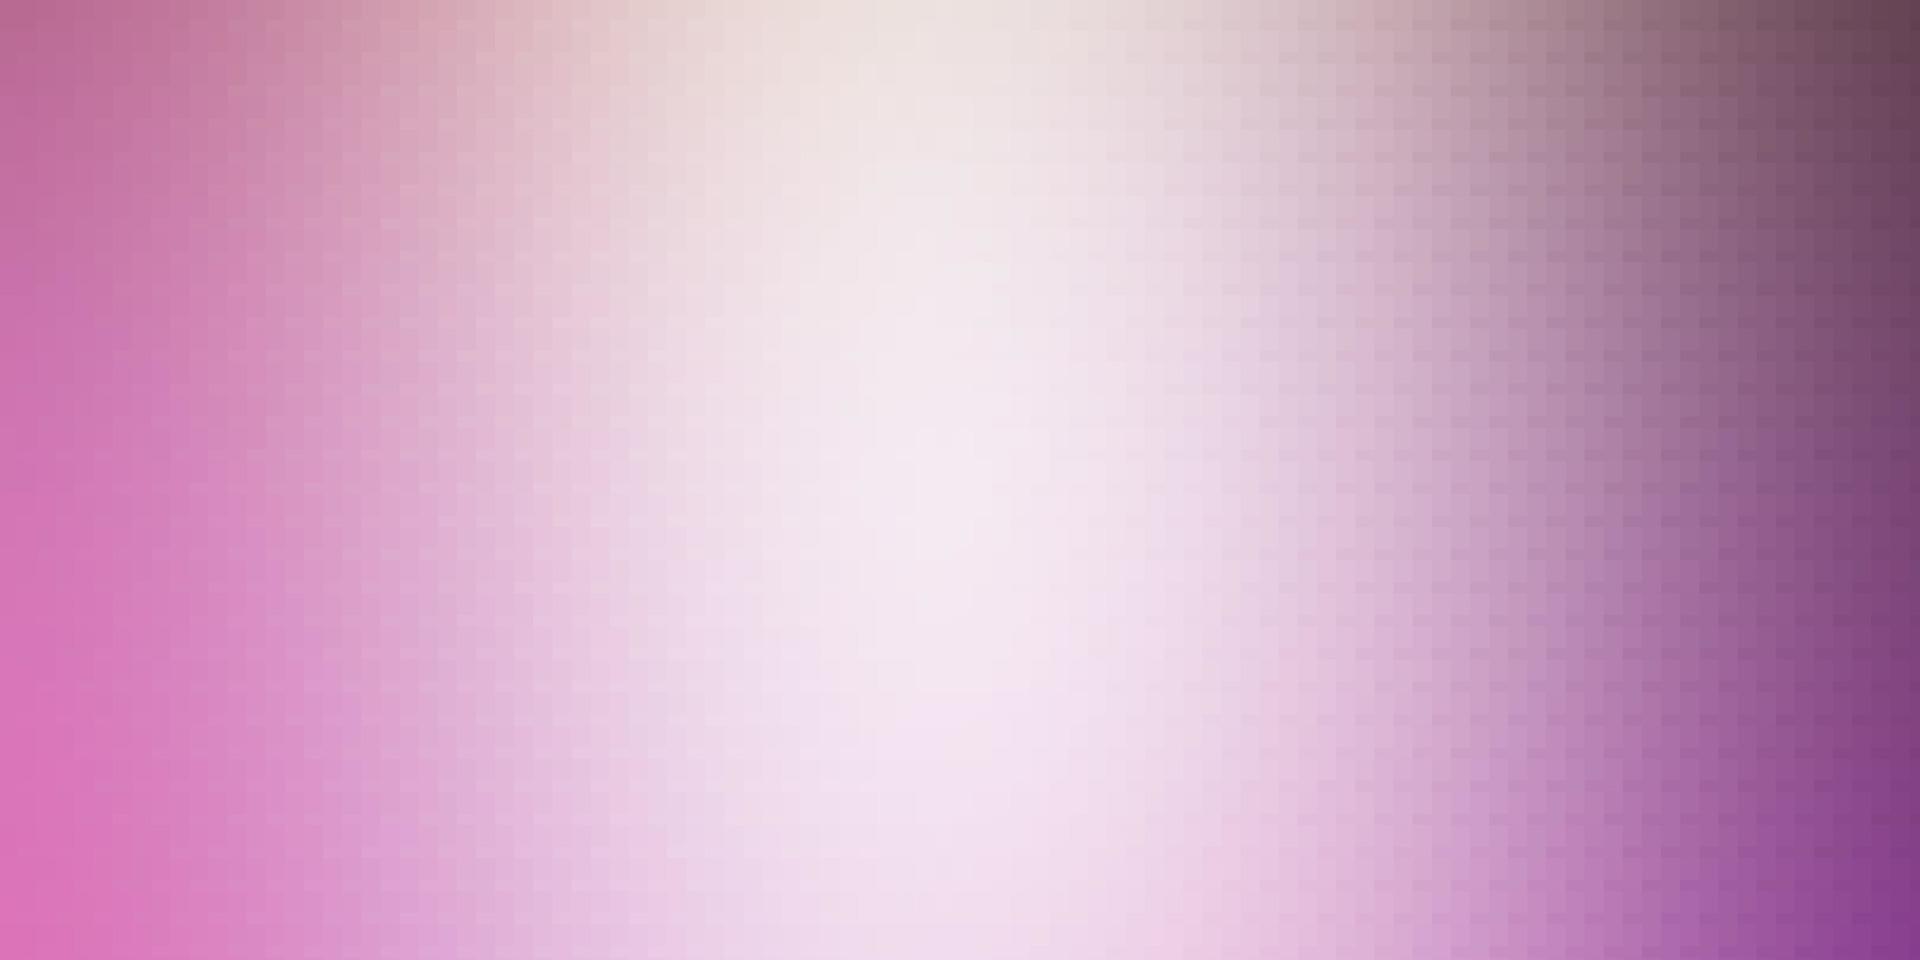 Light Pink, Green vector template in rectangles.